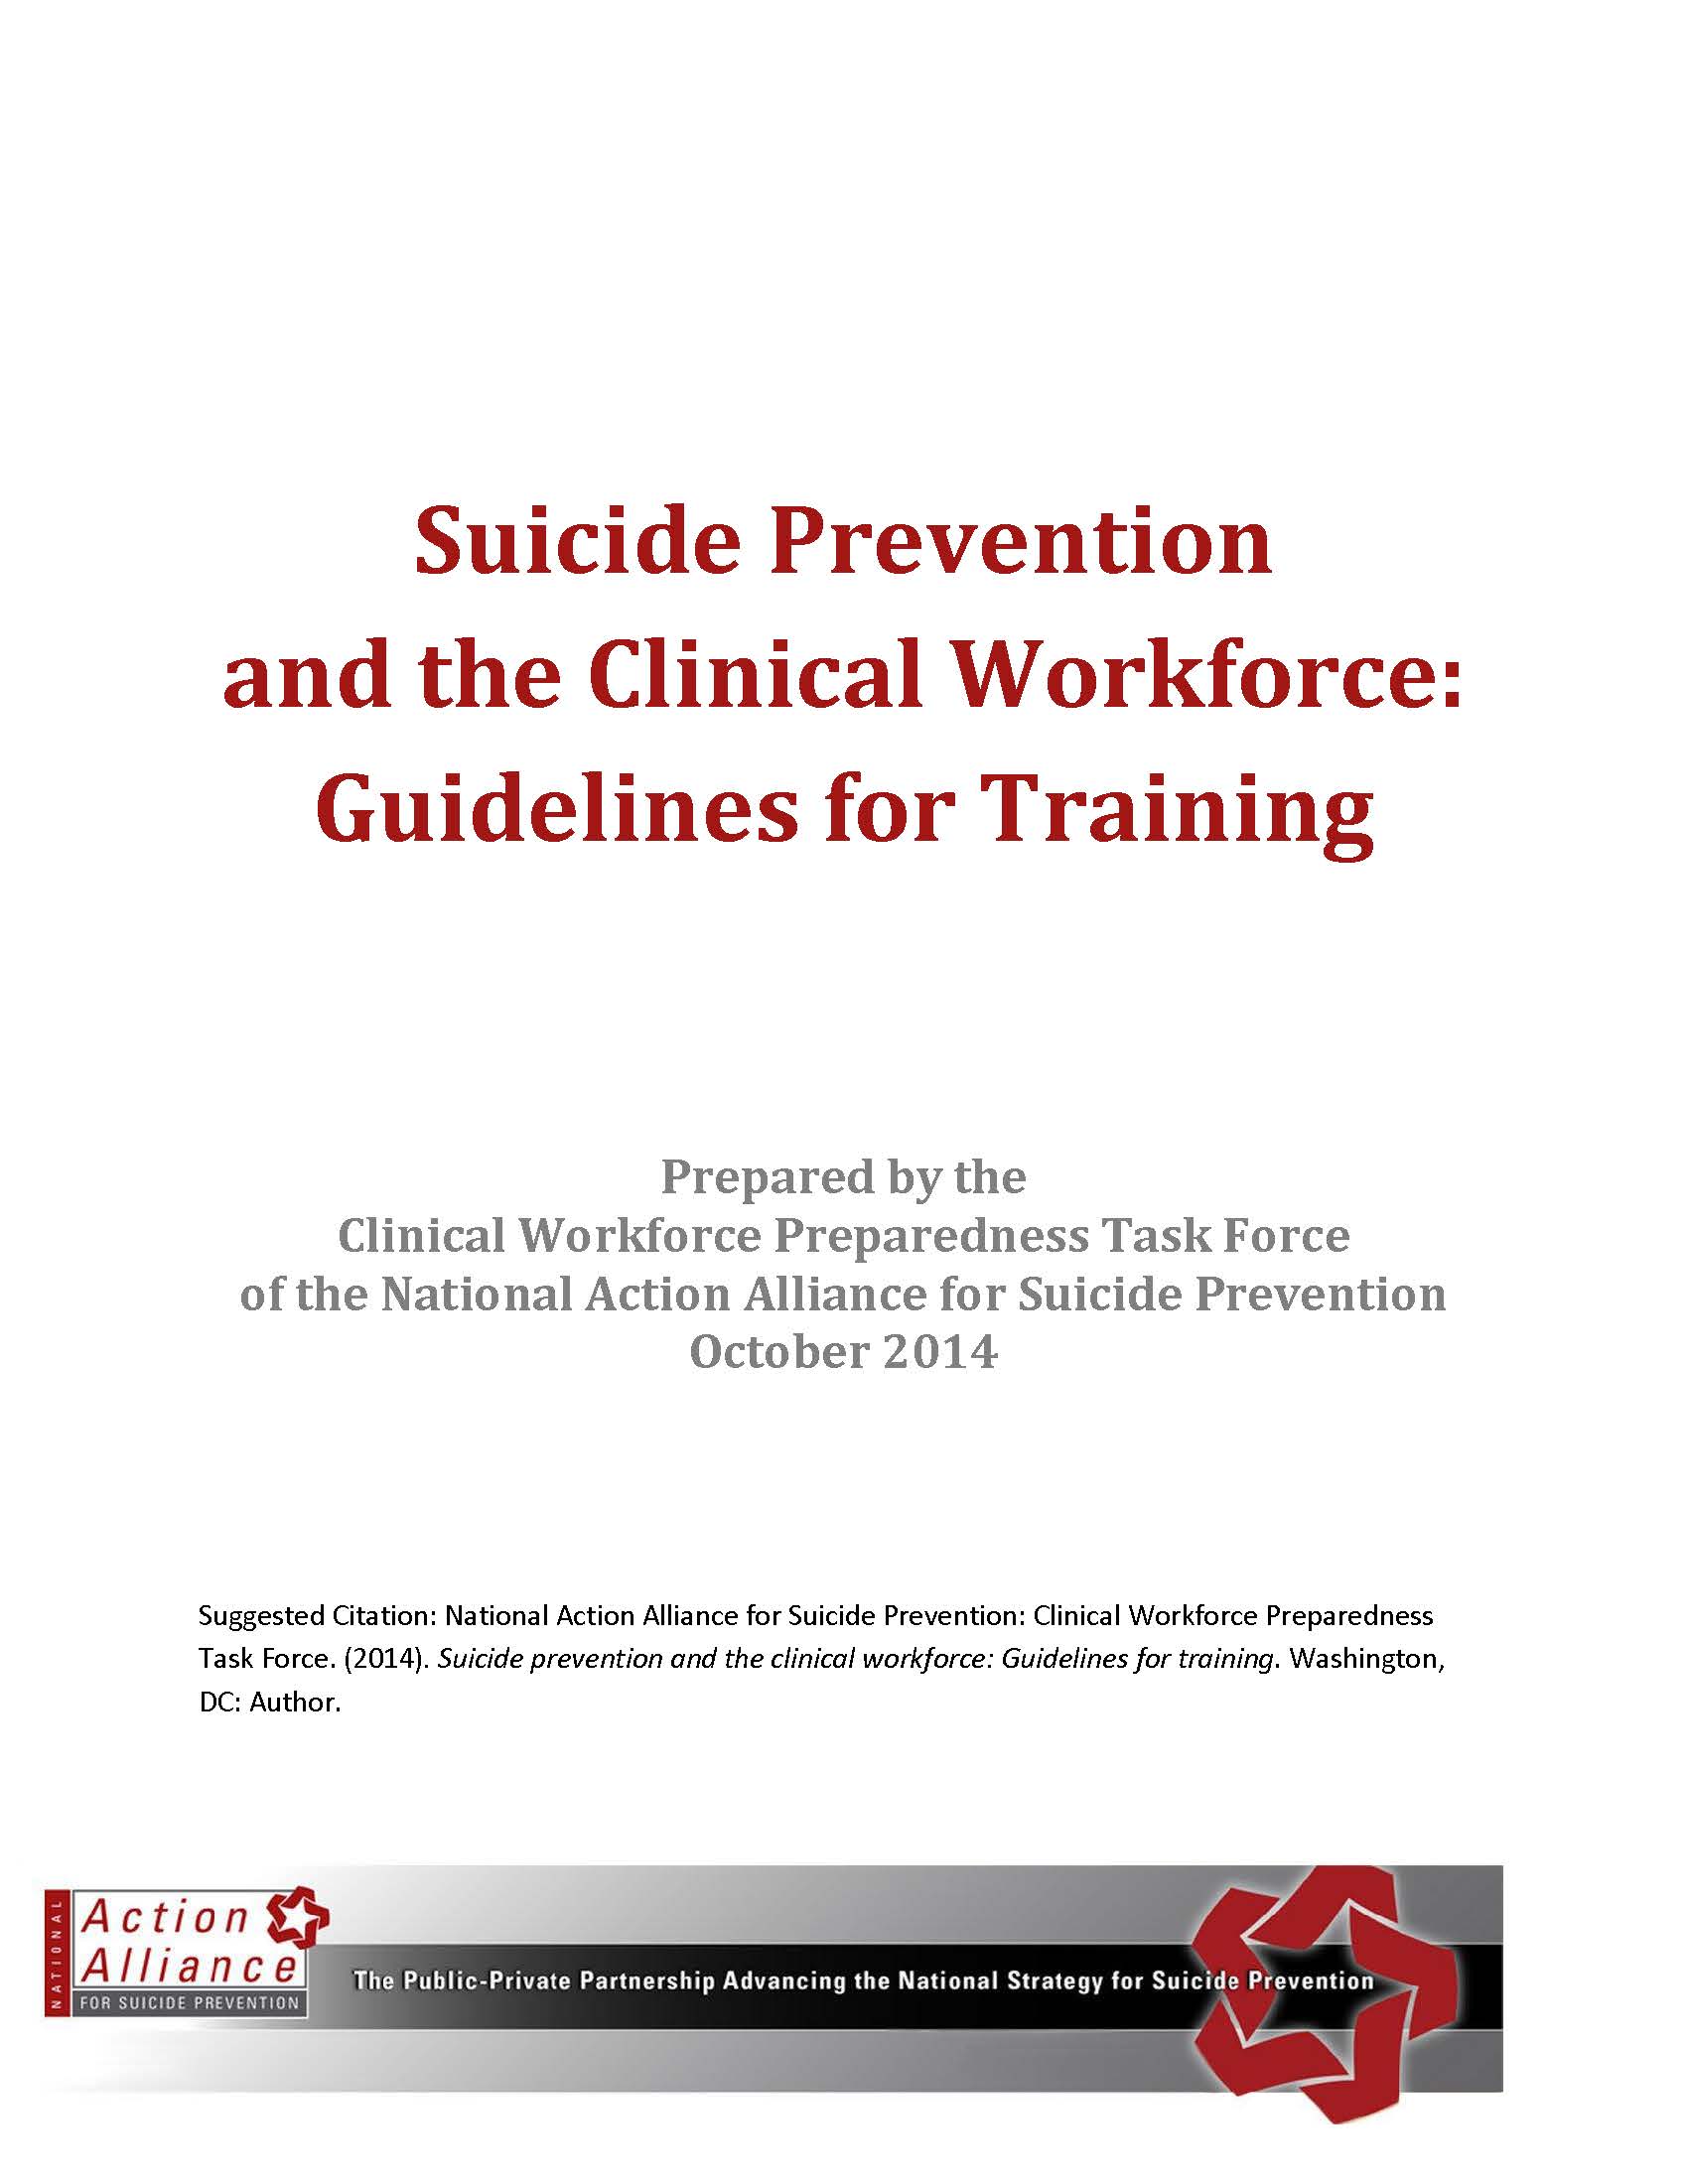  Suicide Prevention and the Clinical Workforce: Guidelines for Training